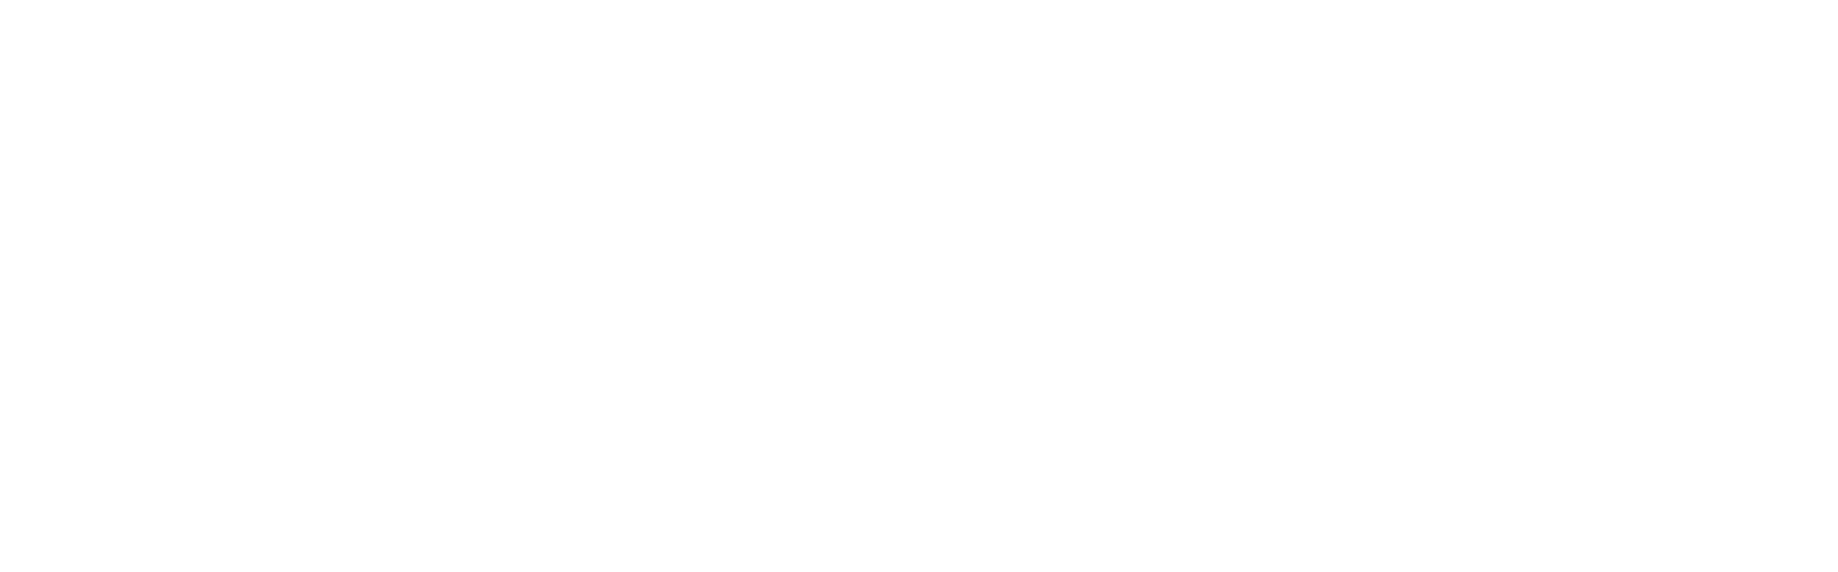 Stress Less Tech Solutions Logo in all white